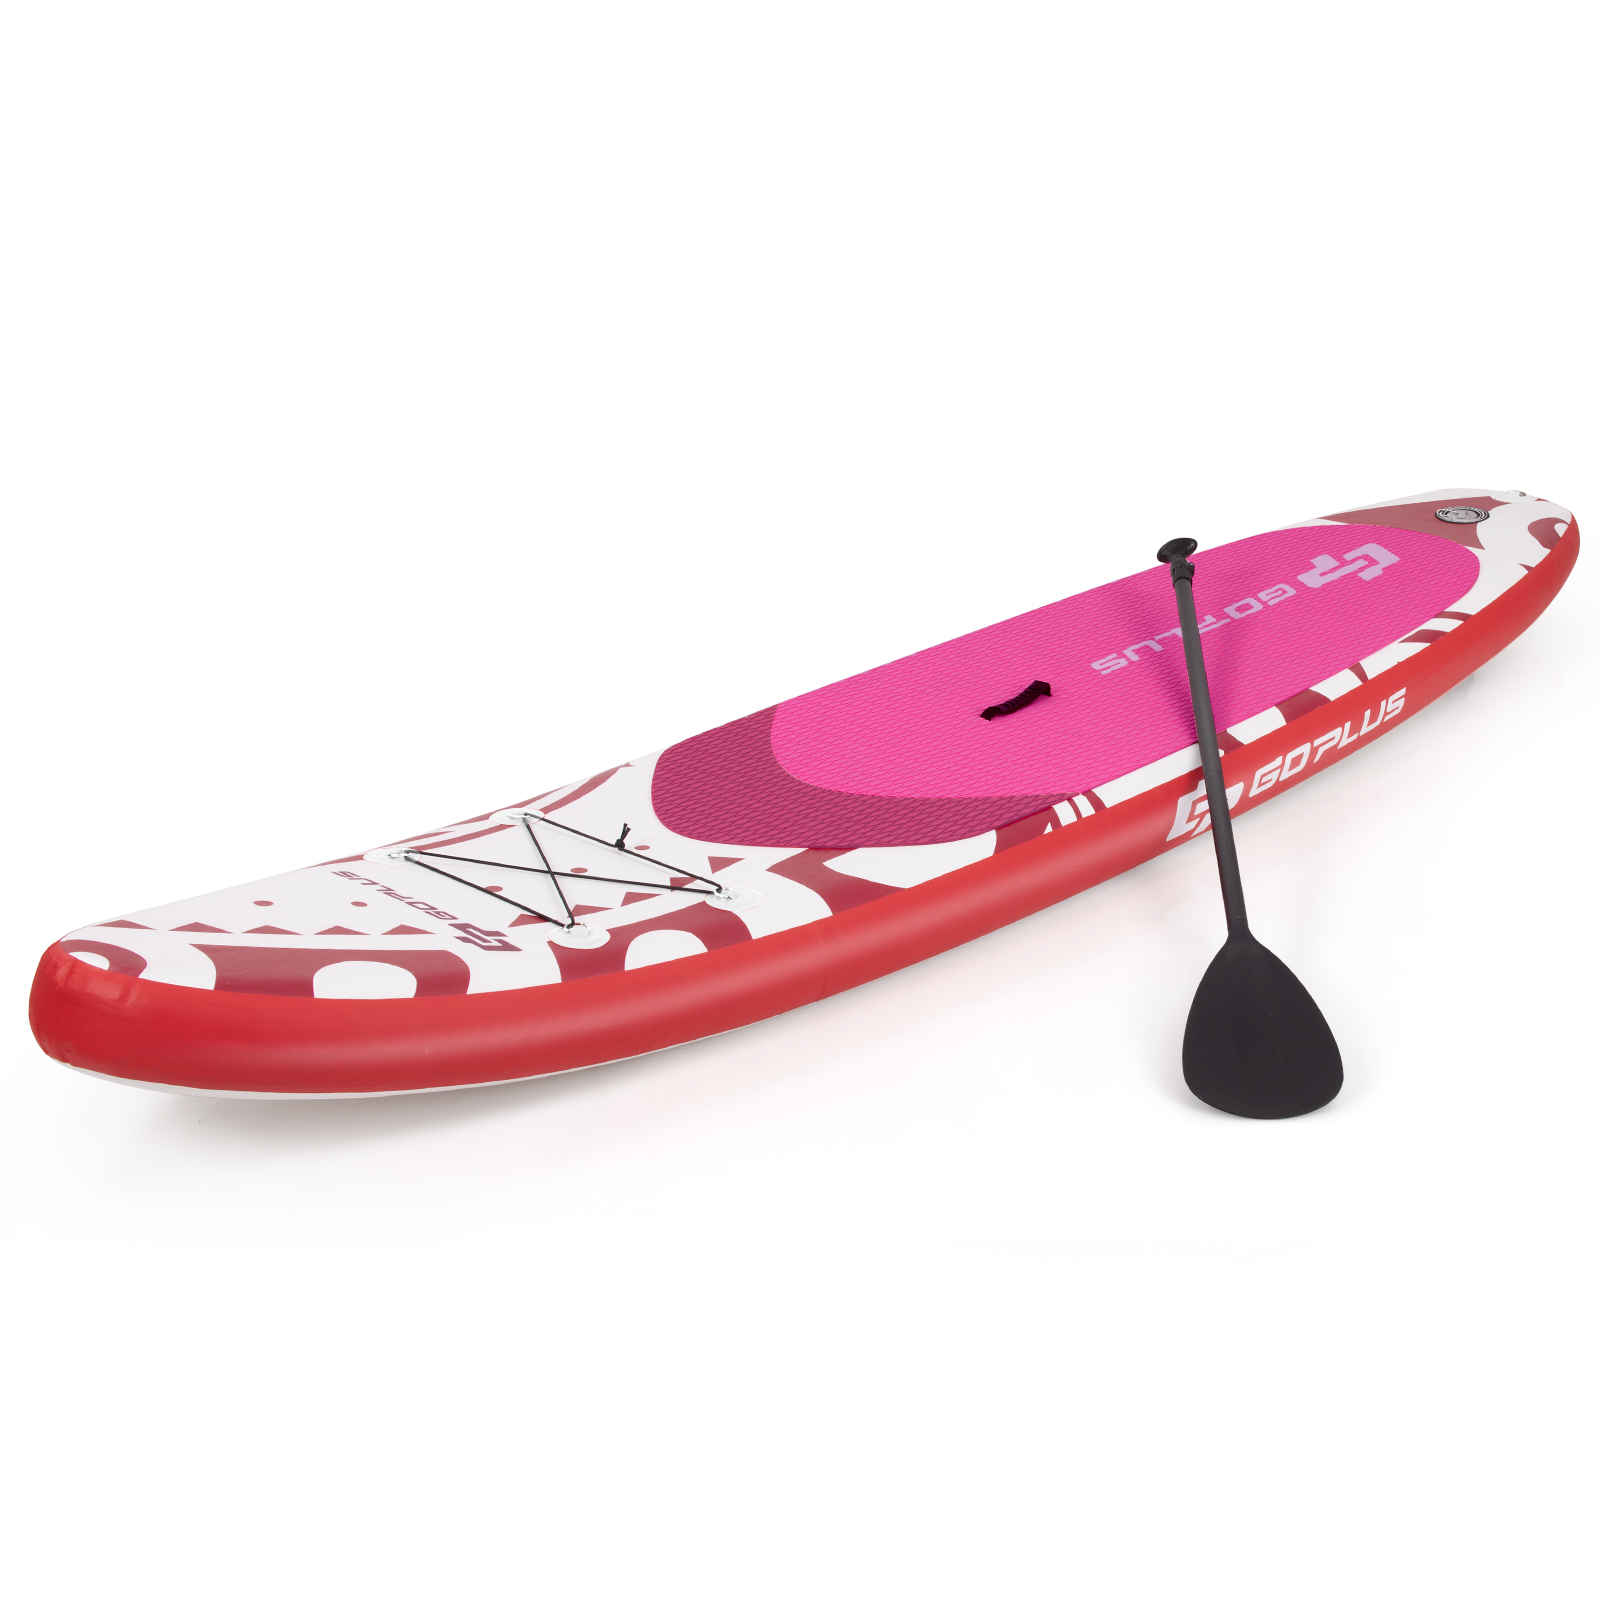 Up Stand SUP Board Paddle, COSTWAY Rosa